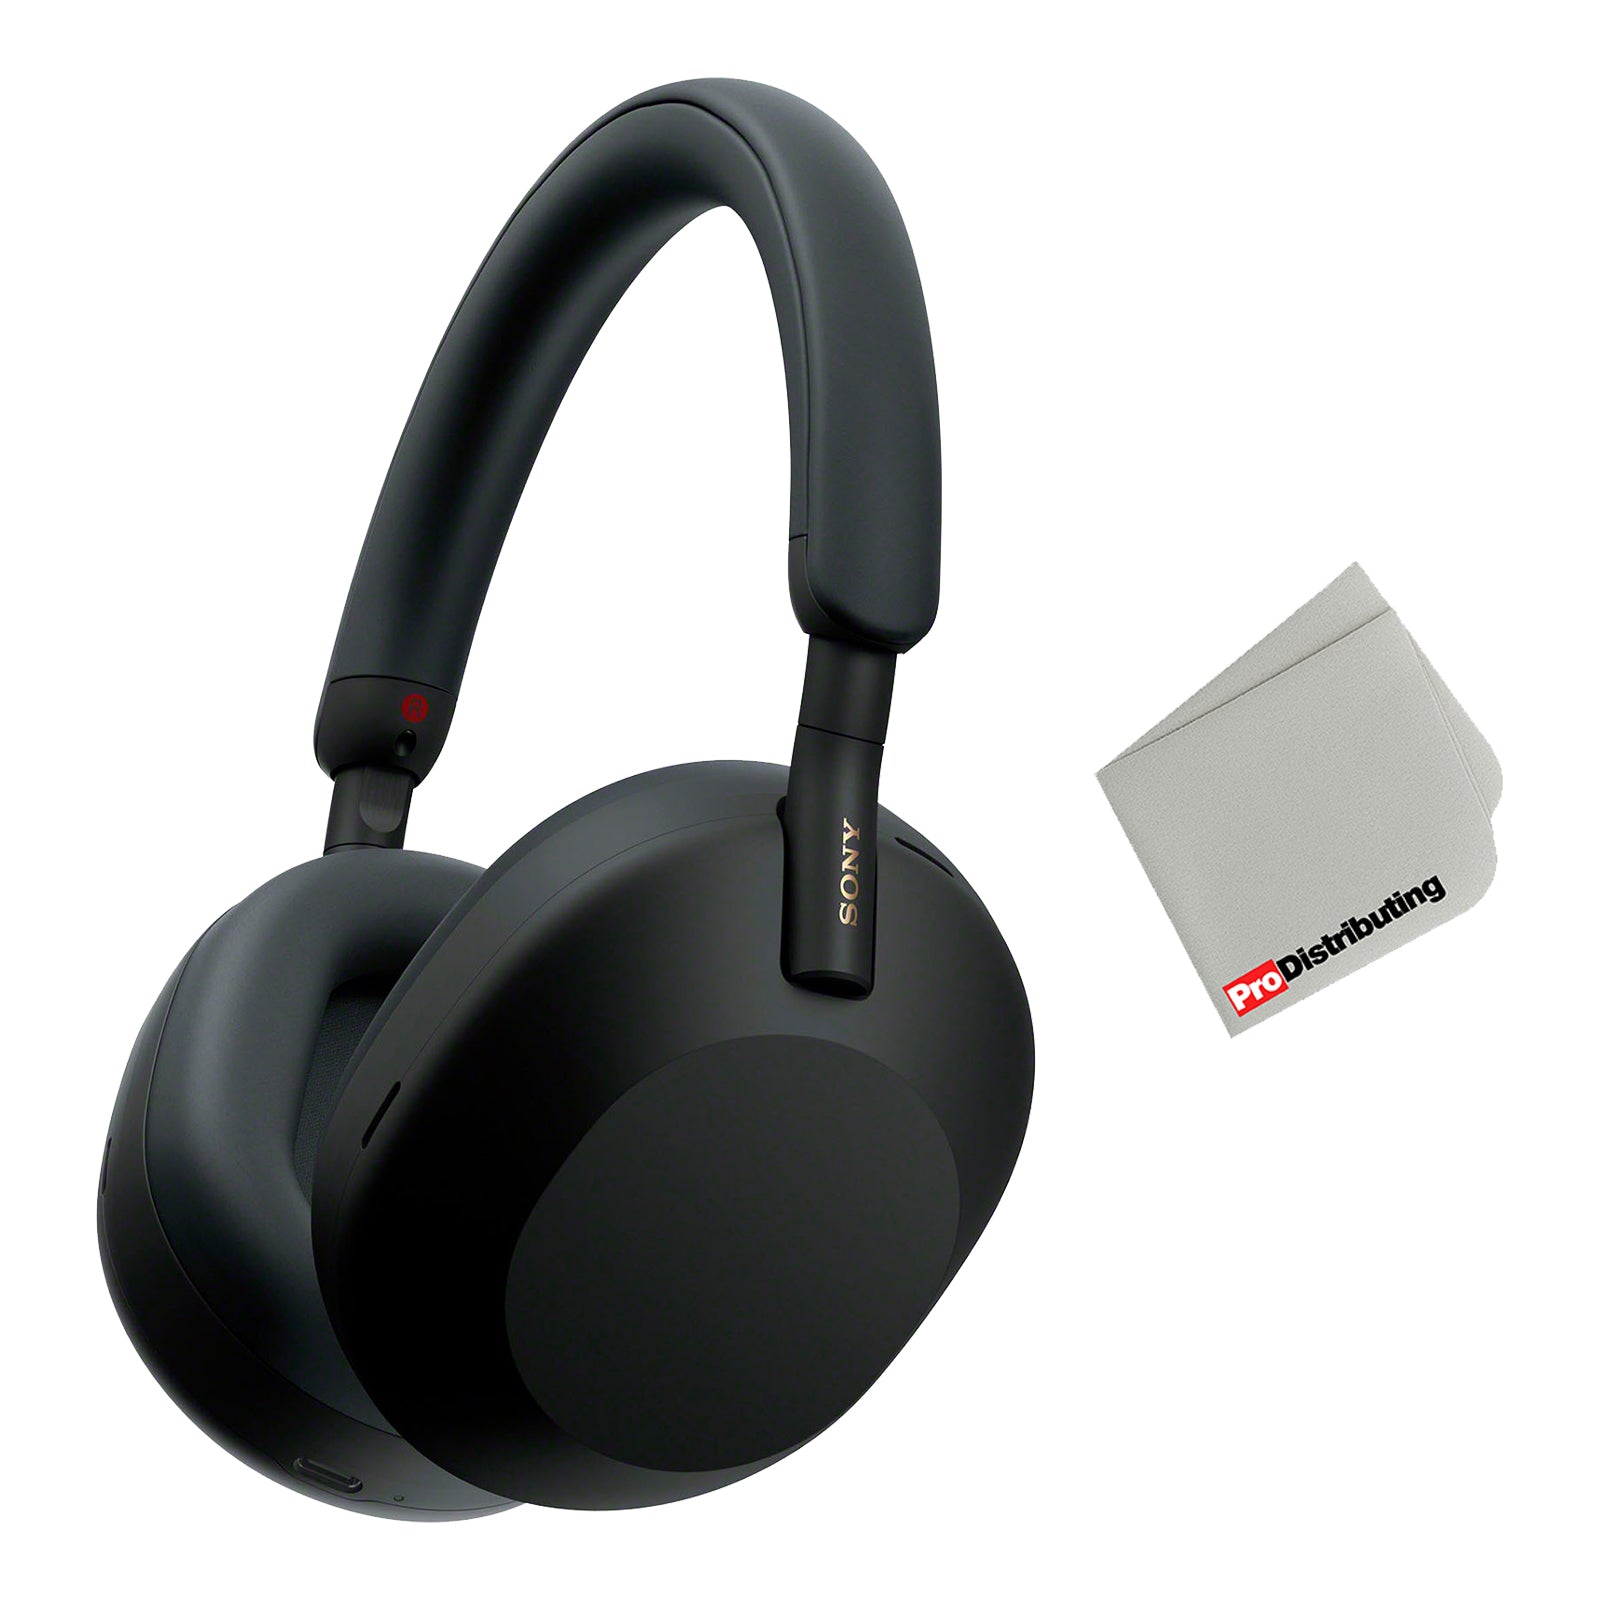 Sony WH-1000XM5 Bluetooth Wireless Noise Canceling Headphones and Microfiber Cleaning Cloth - Pro-Distributing